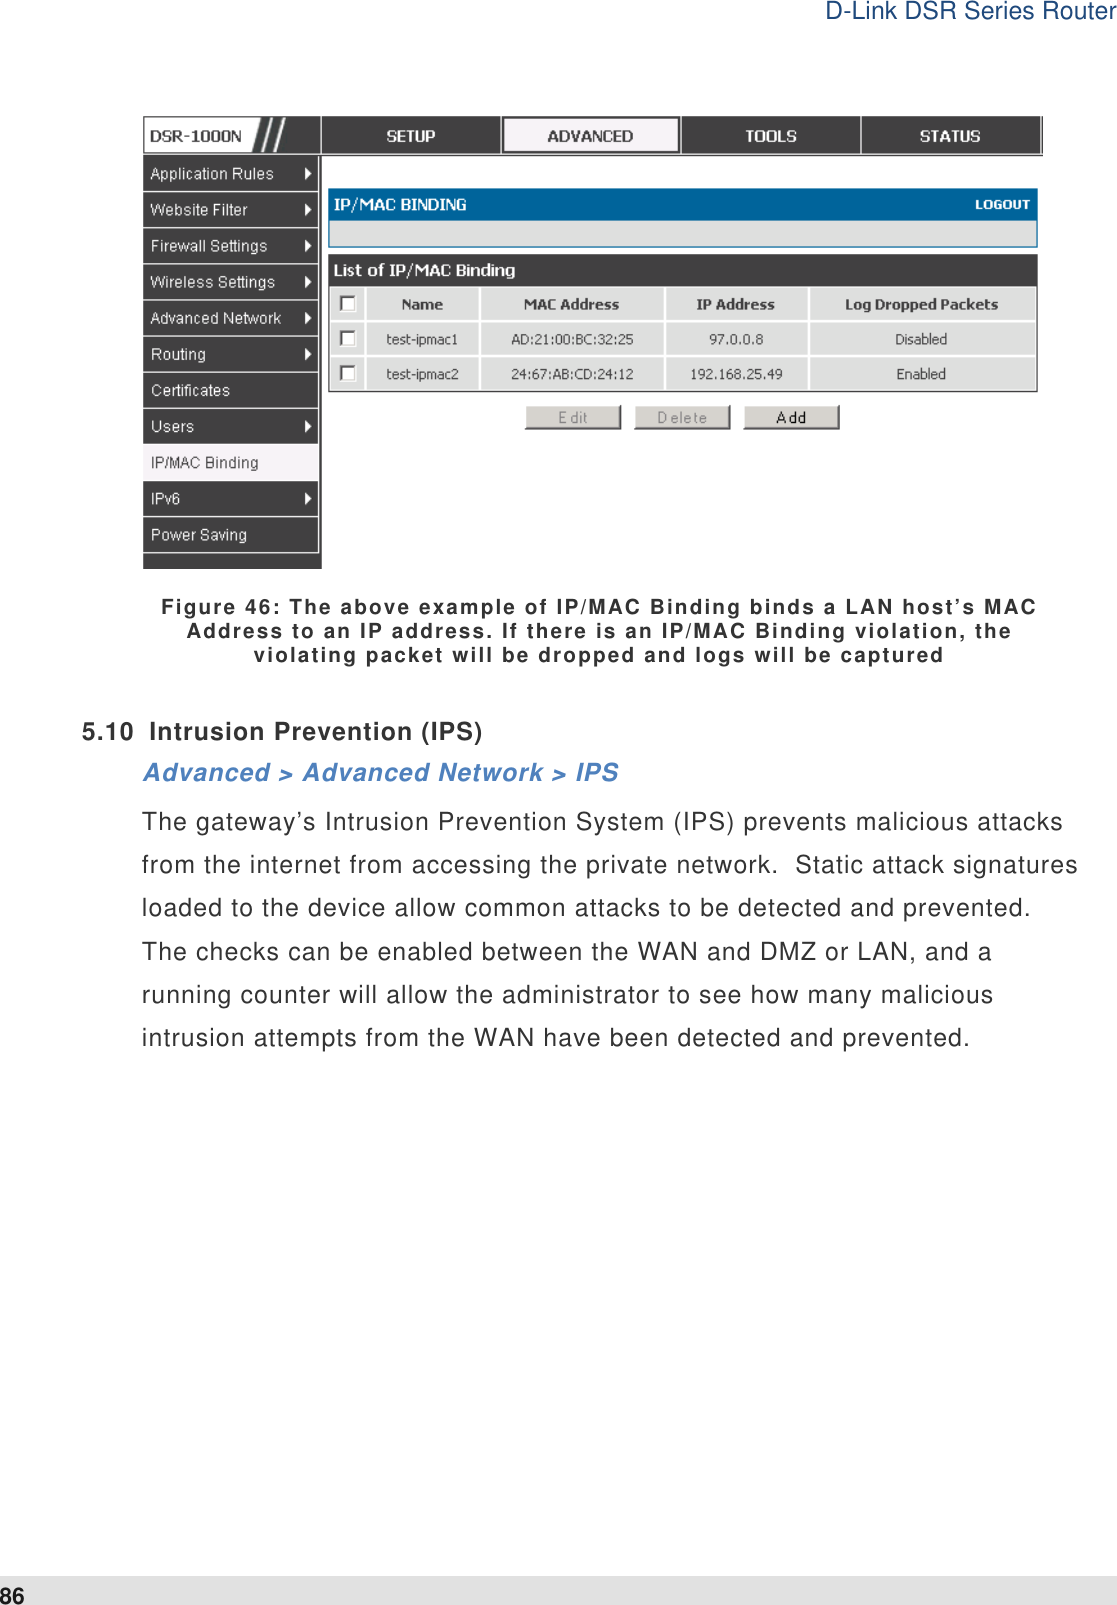 D-Link DSR Series Router 86  Figure 46: The above example of IP/MAC Binding binds a LAN host’s MAC Address to an IP address. If there is an IP/MAC Binding violation, the violating packet will be dropped and logs will be captured  5.10  Intrusion Prevention (IPS) Advanced &gt; Advanced Network &gt; IPS The gateway’s Intrusion Prevention System (IPS) prevents malicious attacks from the internet from accessing the private network.  Static attack signatures loaded to the device allow common attacks to be detected and prevented.  The checks can be enabled between the WAN and DMZ or LAN, and a running counter will allow the administrator to see how many malicious intrusion attempts from the WAN have been detected and prevented.   